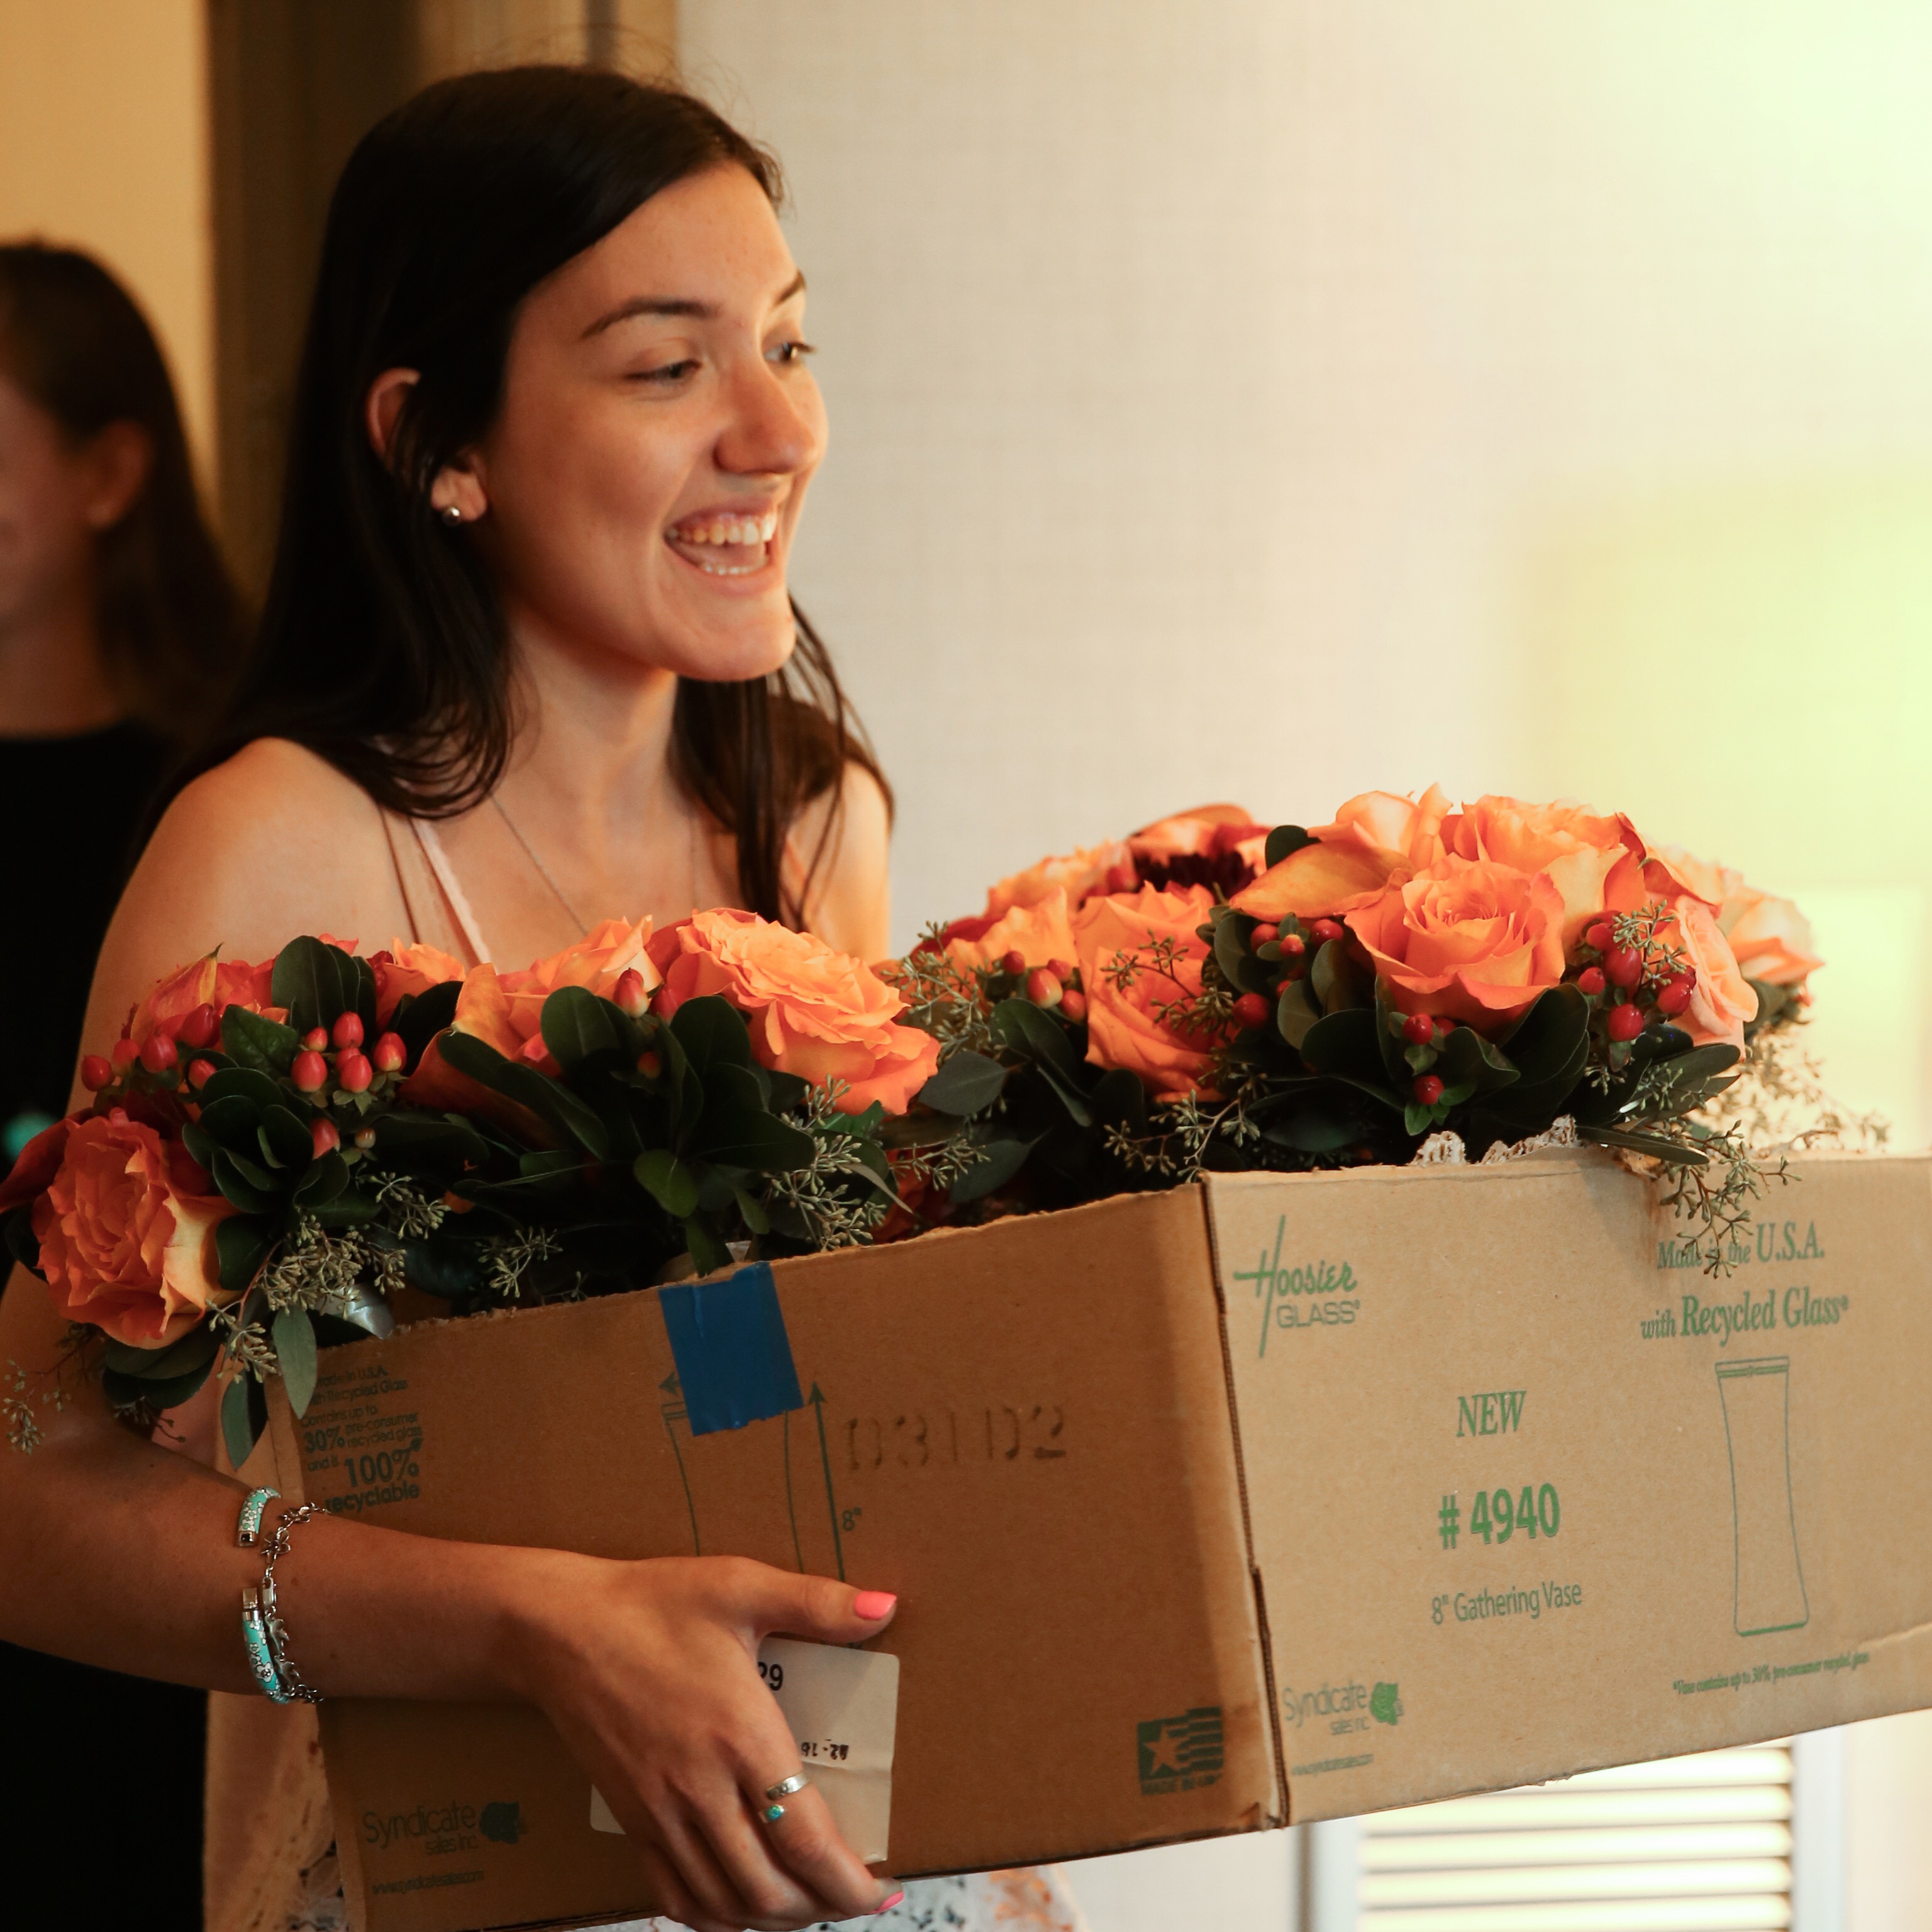 Jackie at the Royal Sonesta Boston delivering flowers to the bridal suite